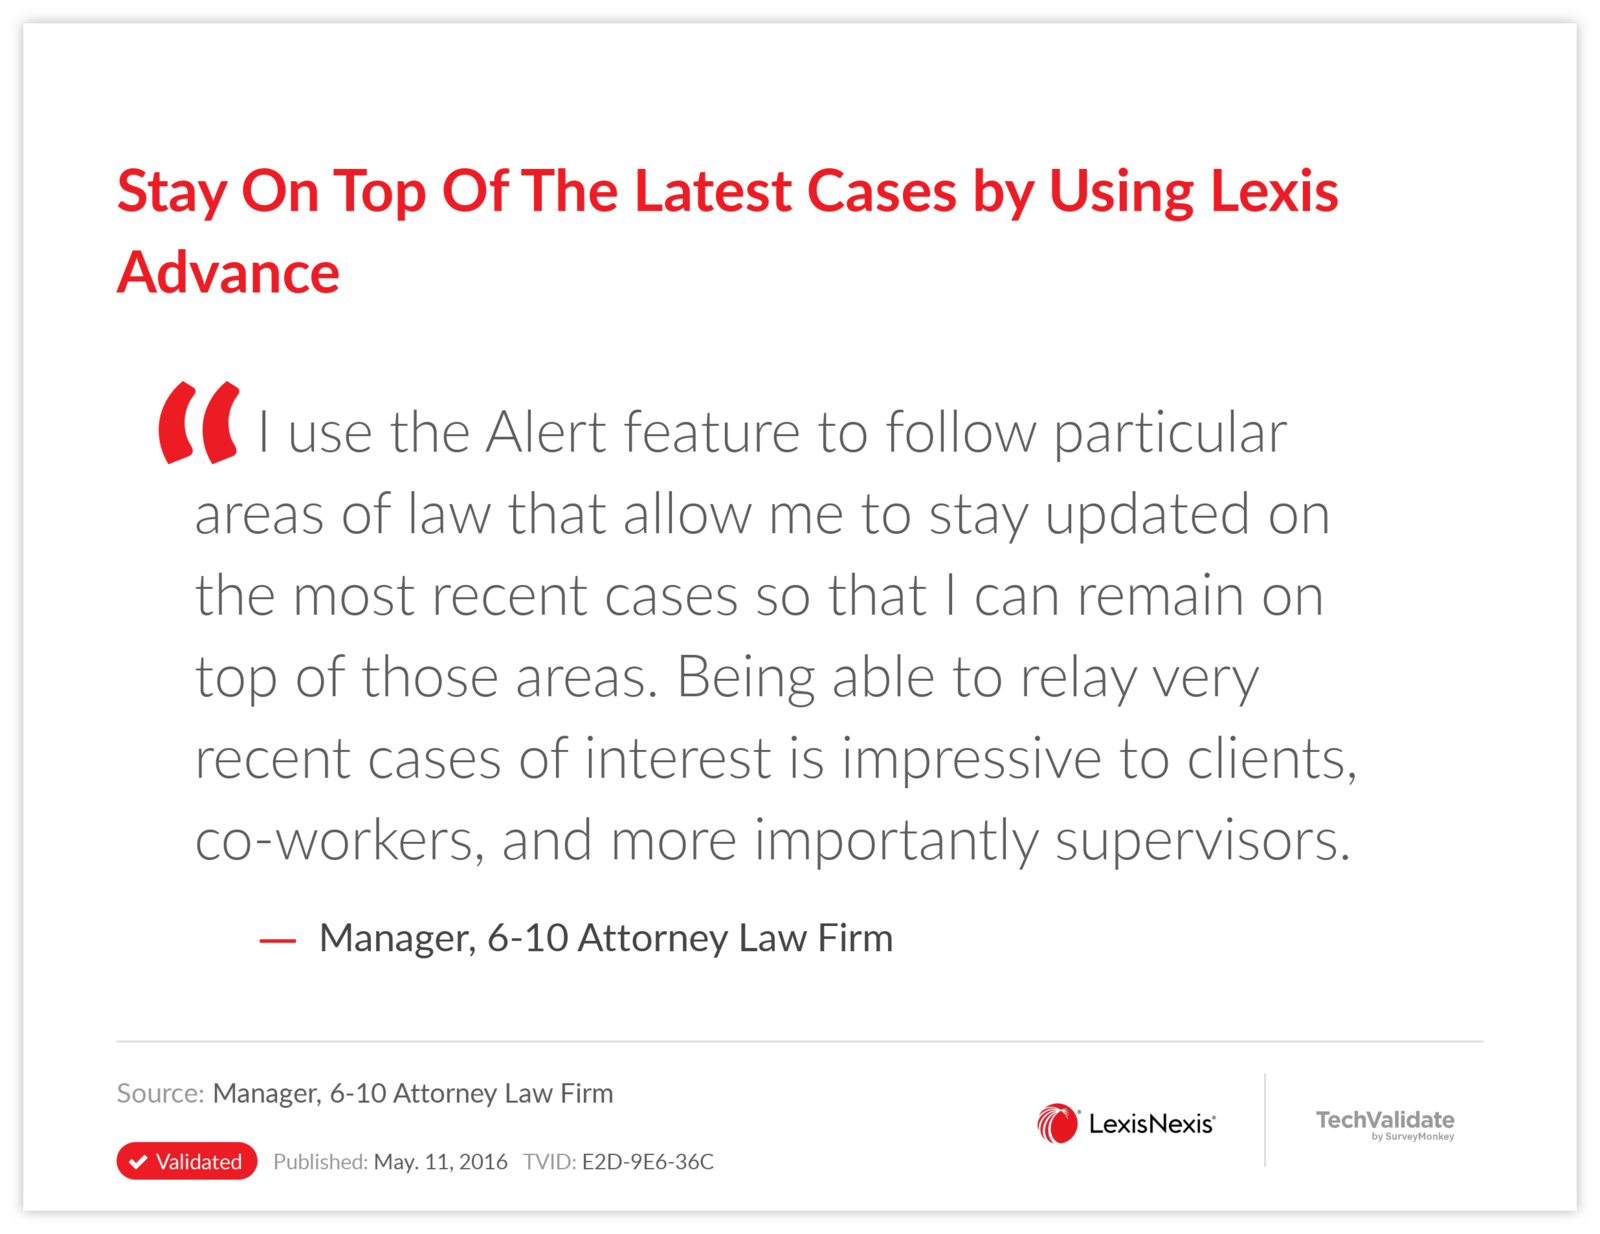 Stay On Top Of The Latest Cases by Using Lexis Advance